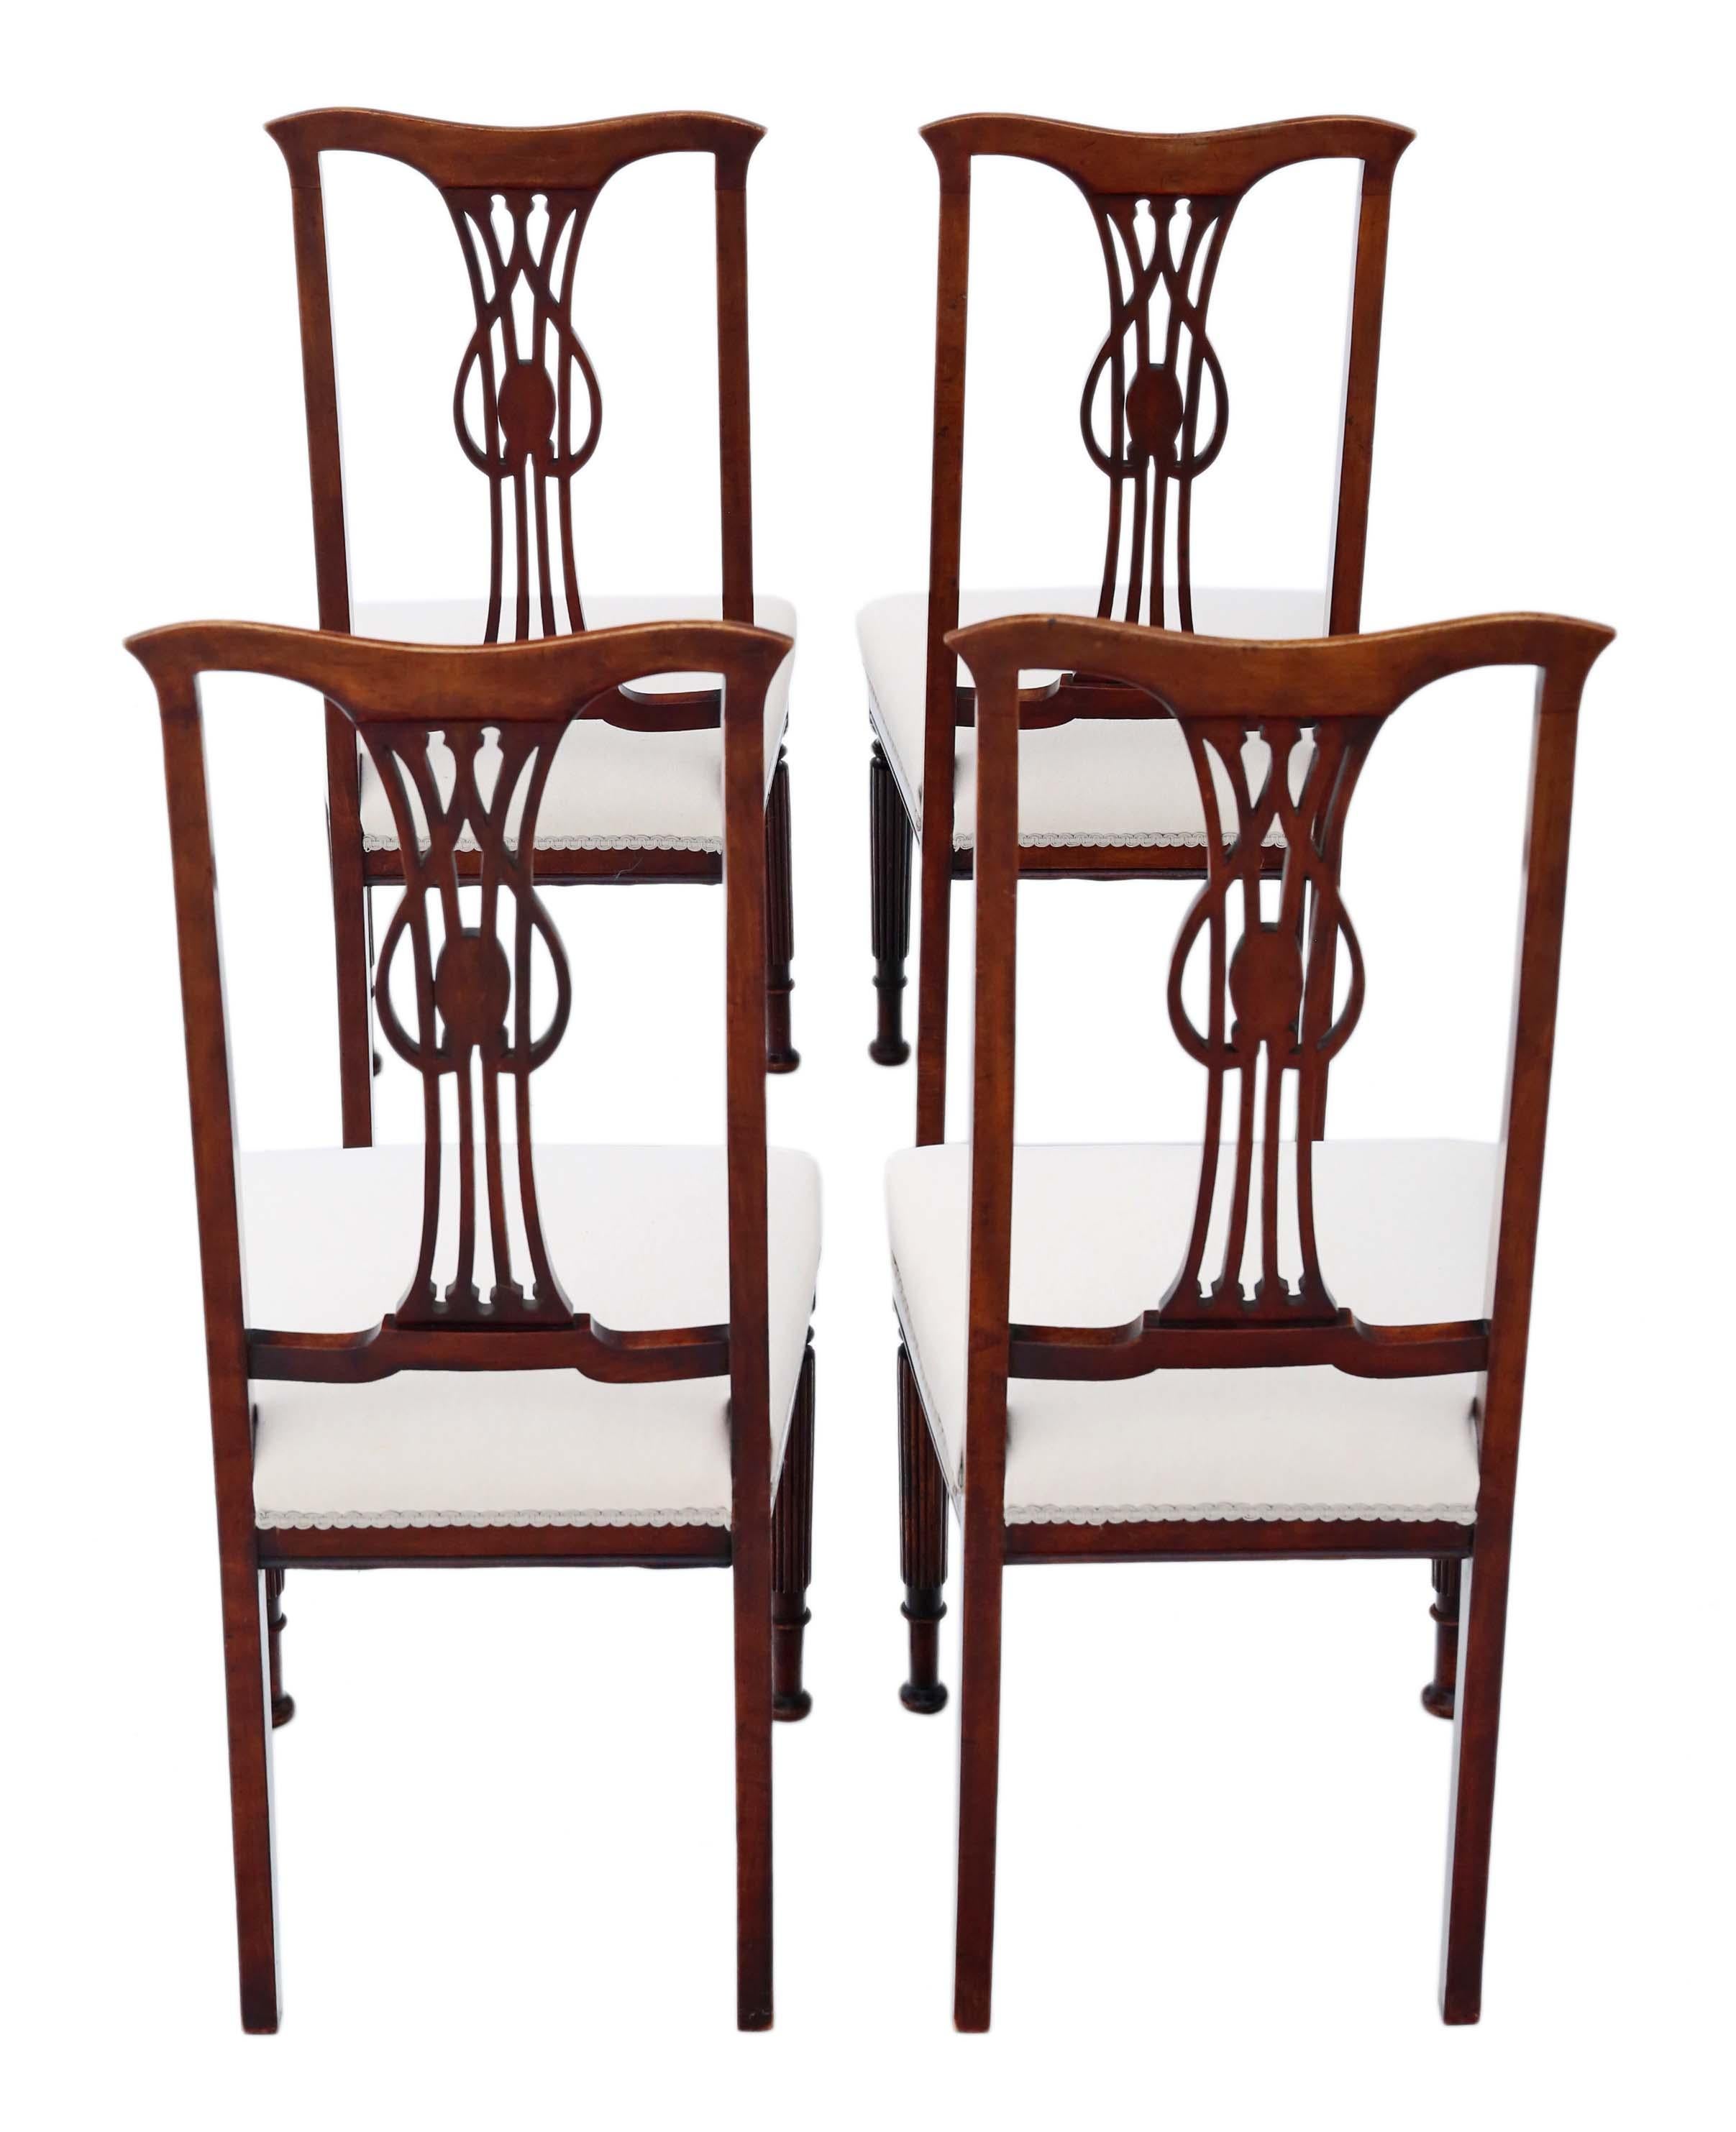 Set of 4 Victorian circa 1900 Art Nouveau inlaid mahogany dining chairs.
Strong with no loose joints and no woodworm. A rare find.
New upholstery in a heavy weight upholstery fabric, with an off white color.
Would look great in the right